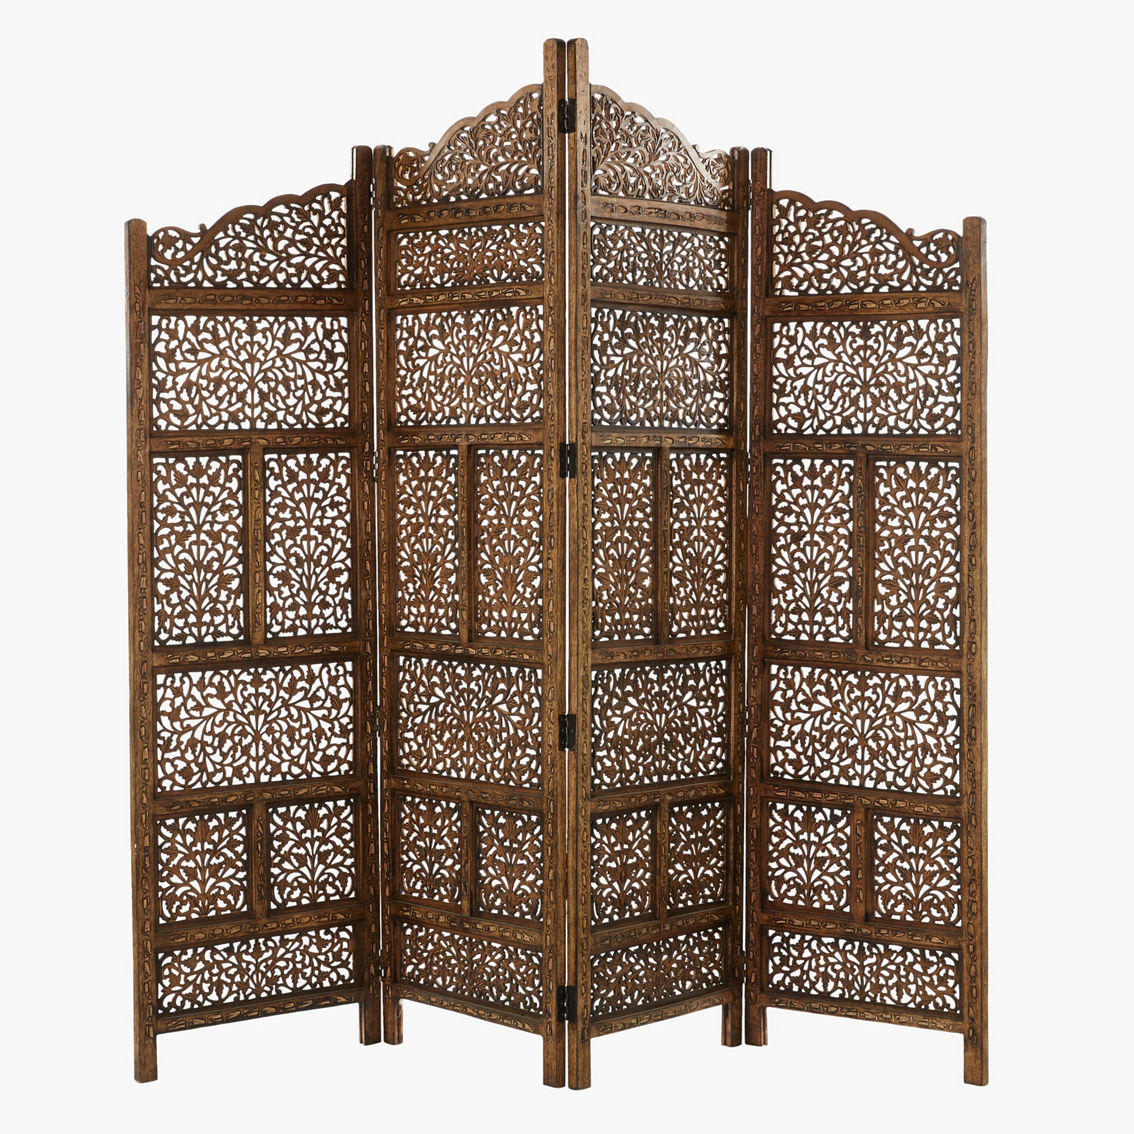 Morgan Hill Home Traditional Brown Wood Room Divider Screen - Image 3 of 5